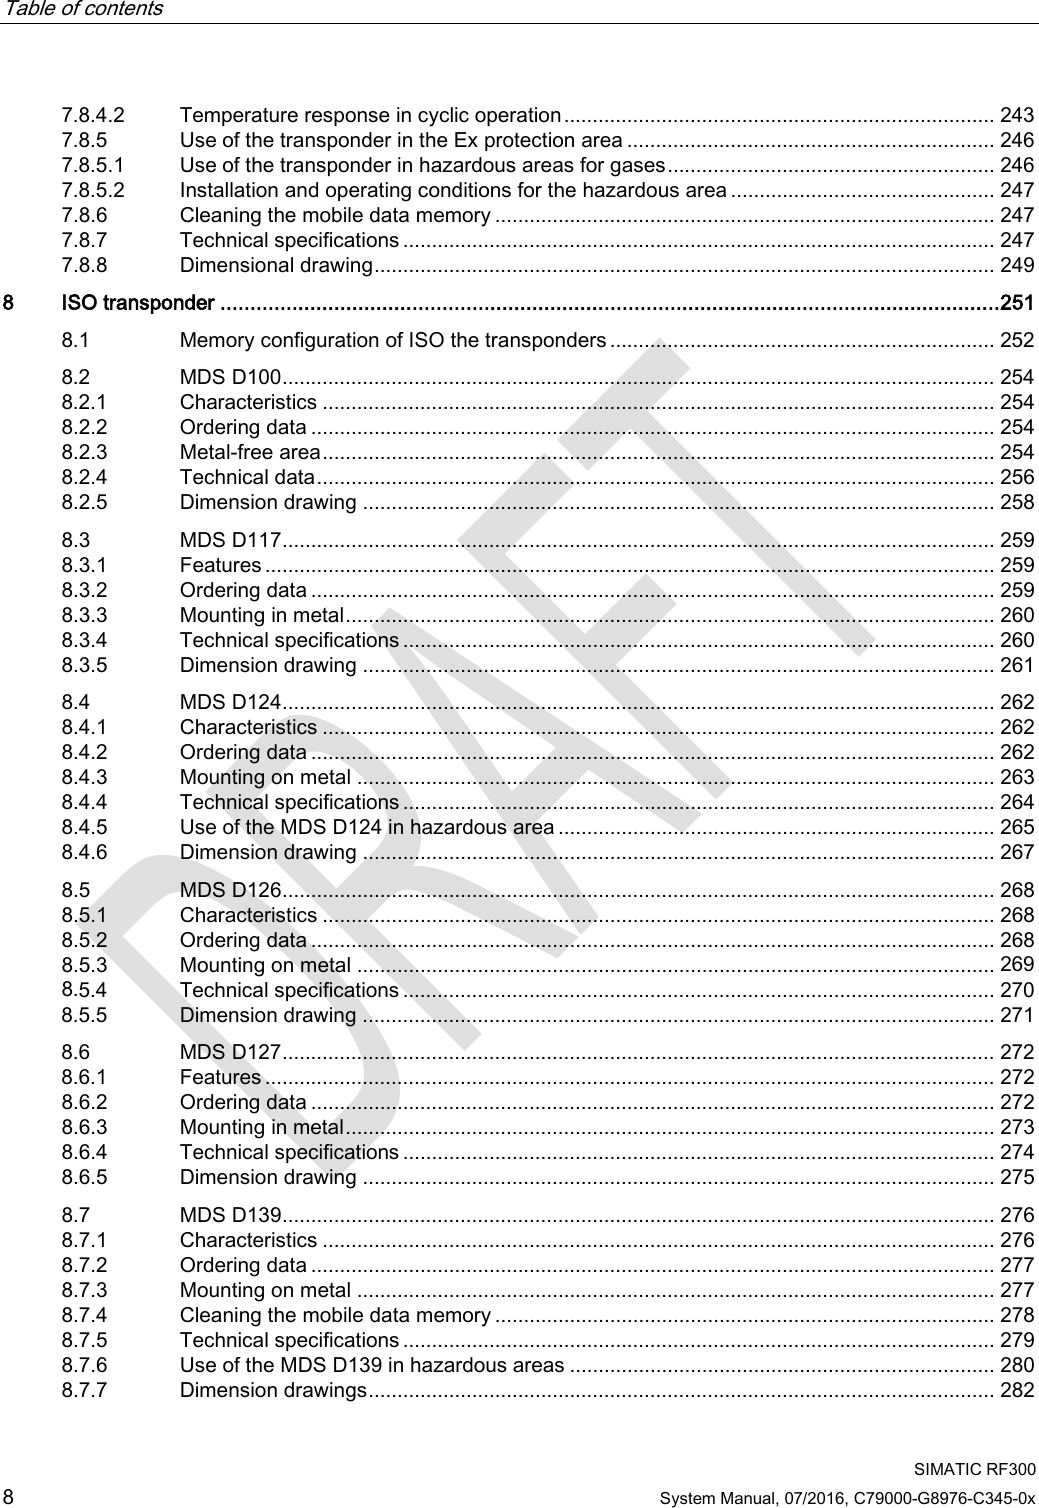 Table of contents     SIMATIC RF300 8 System Manual, 07/2016, C79000-G8976-C345-0x 7.8.4.2 Temperature response in cyclic operation ........................................................................... 243 7.8.5 Use of the transponder in the Ex protection area ................................................................ 246 7.8.5.1 Use of the transponder in hazardous areas for gases ......................................................... 246 7.8.5.2 Installation and operating conditions for the hazardous area .............................................. 247 7.8.6 Cleaning the mobile data memory ....................................................................................... 247 7.8.7 Technical specifications ....................................................................................................... 247 7.8.8 Dimensional drawing ............................................................................................................ 249 8  ISO transponder .................................................................................................................................. 251 8.1 Memory configuration of ISO the transponders ................................................................... 252 8.2 MDS D100 ............................................................................................................................ 254 8.2.1 Characteristics ..................................................................................................................... 254 8.2.2 Ordering data ....................................................................................................................... 254 8.2.3 Metal-free area ..................................................................................................................... 254 8.2.4 Technical data ...................................................................................................................... 256 8.2.5 Dimension drawing .............................................................................................................. 258 8.3 MDS D117 ............................................................................................................................ 259 8.3.1 Features ............................................................................................................................... 259 8.3.2 Ordering data ....................................................................................................................... 259 8.3.3 Mounting in metal ................................................................................................................. 260 8.3.4 Technical specifications ....................................................................................................... 260 8.3.5 Dimension drawing .............................................................................................................. 261 8.4 MDS D124 ............................................................................................................................ 262 8.4.1 Characteristics ..................................................................................................................... 262 8.4.2 Ordering data ....................................................................................................................... 262 8.4.3 Mounting on metal ............................................................................................................... 263 8.4.4 Technical specifications ....................................................................................................... 264 8.4.5 Use of the MDS D124 in hazardous area ............................................................................ 265 8.4.6 Dimension drawing .............................................................................................................. 267 8.5 MDS D126 ............................................................................................................................ 268 8.5.1 Characteristics ..................................................................................................................... 268 8.5.2 Ordering data ....................................................................................................................... 268 8.5.3 Mounting on metal ............................................................................................................... 269 8.5.4 Technical specifications ....................................................................................................... 270 8.5.5 Dimension drawing .............................................................................................................. 271 8.6 MDS D127 ............................................................................................................................ 272 8.6.1 Features ............................................................................................................................... 272 8.6.2 Ordering data ....................................................................................................................... 272 8.6.3 Mounting in metal ................................................................................................................. 273 8.6.4 Technical specifications ....................................................................................................... 274 8.6.5 Dimension drawing .............................................................................................................. 275 8.7 MDS D139 ............................................................................................................................ 276 8.7.1 Characteristics ..................................................................................................................... 276 8.7.2 Ordering data ....................................................................................................................... 277 8.7.3 Mounting on metal ............................................................................................................... 277 8.7.4 Cleaning the mobile data memory ....................................................................................... 278 8.7.5 Technical specifications ....................................................................................................... 279 8.7.6 Use of the MDS D139 in hazardous areas .......................................................................... 280 8.7.7 Dimension drawings ............................................................................................................. 282 